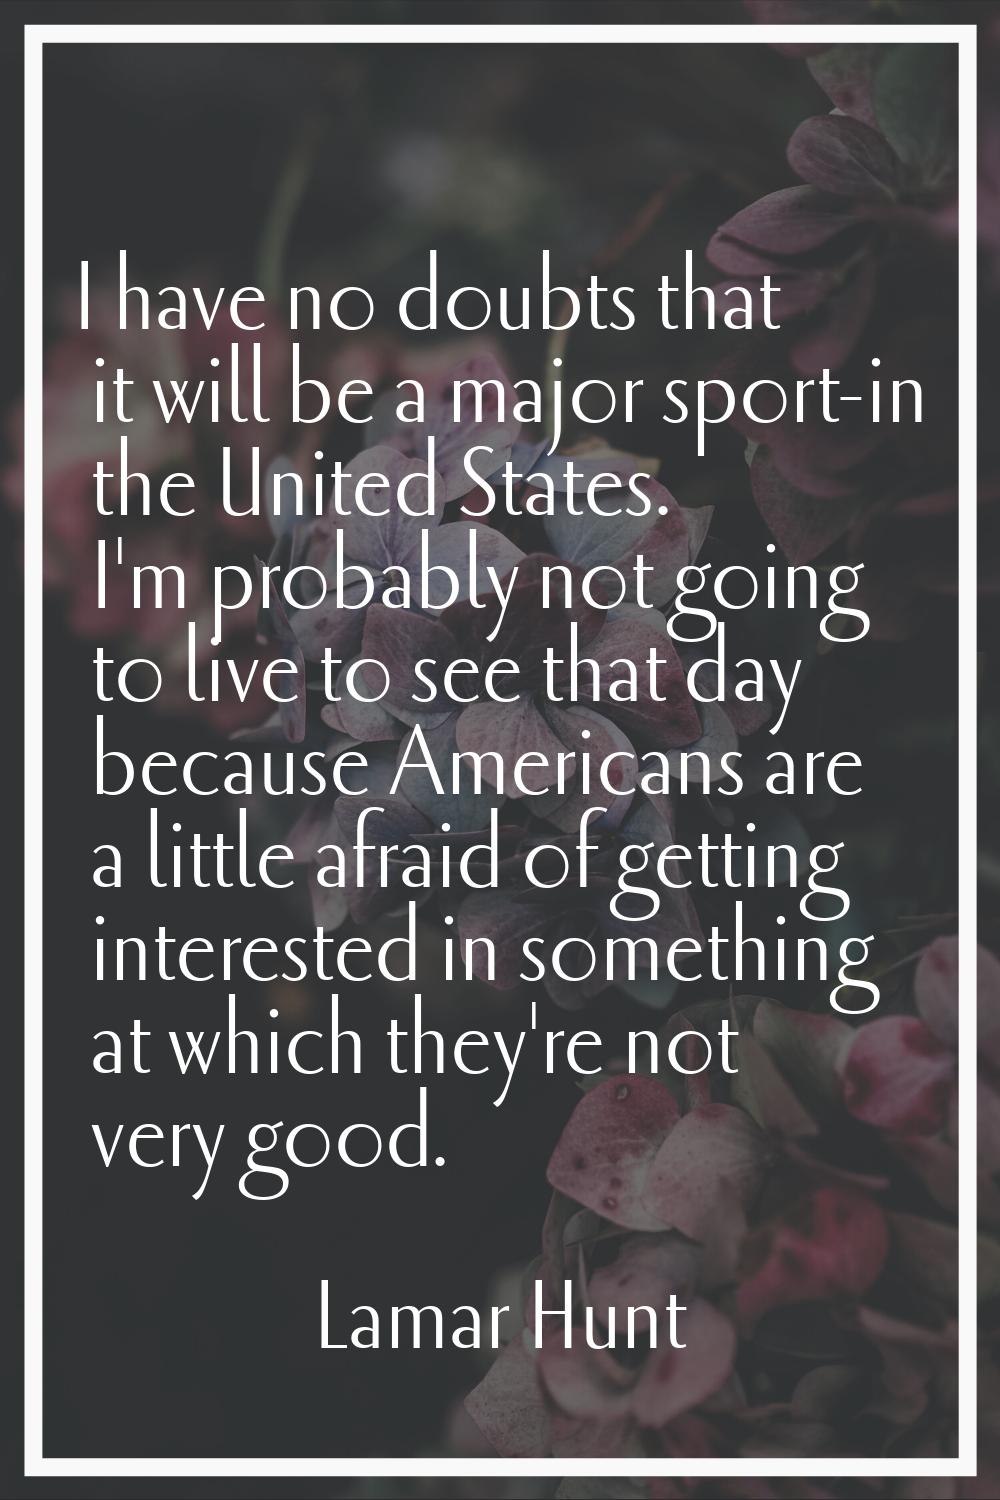 I have no doubts that it will be a major sport-in the United States. I'm probably not going to live